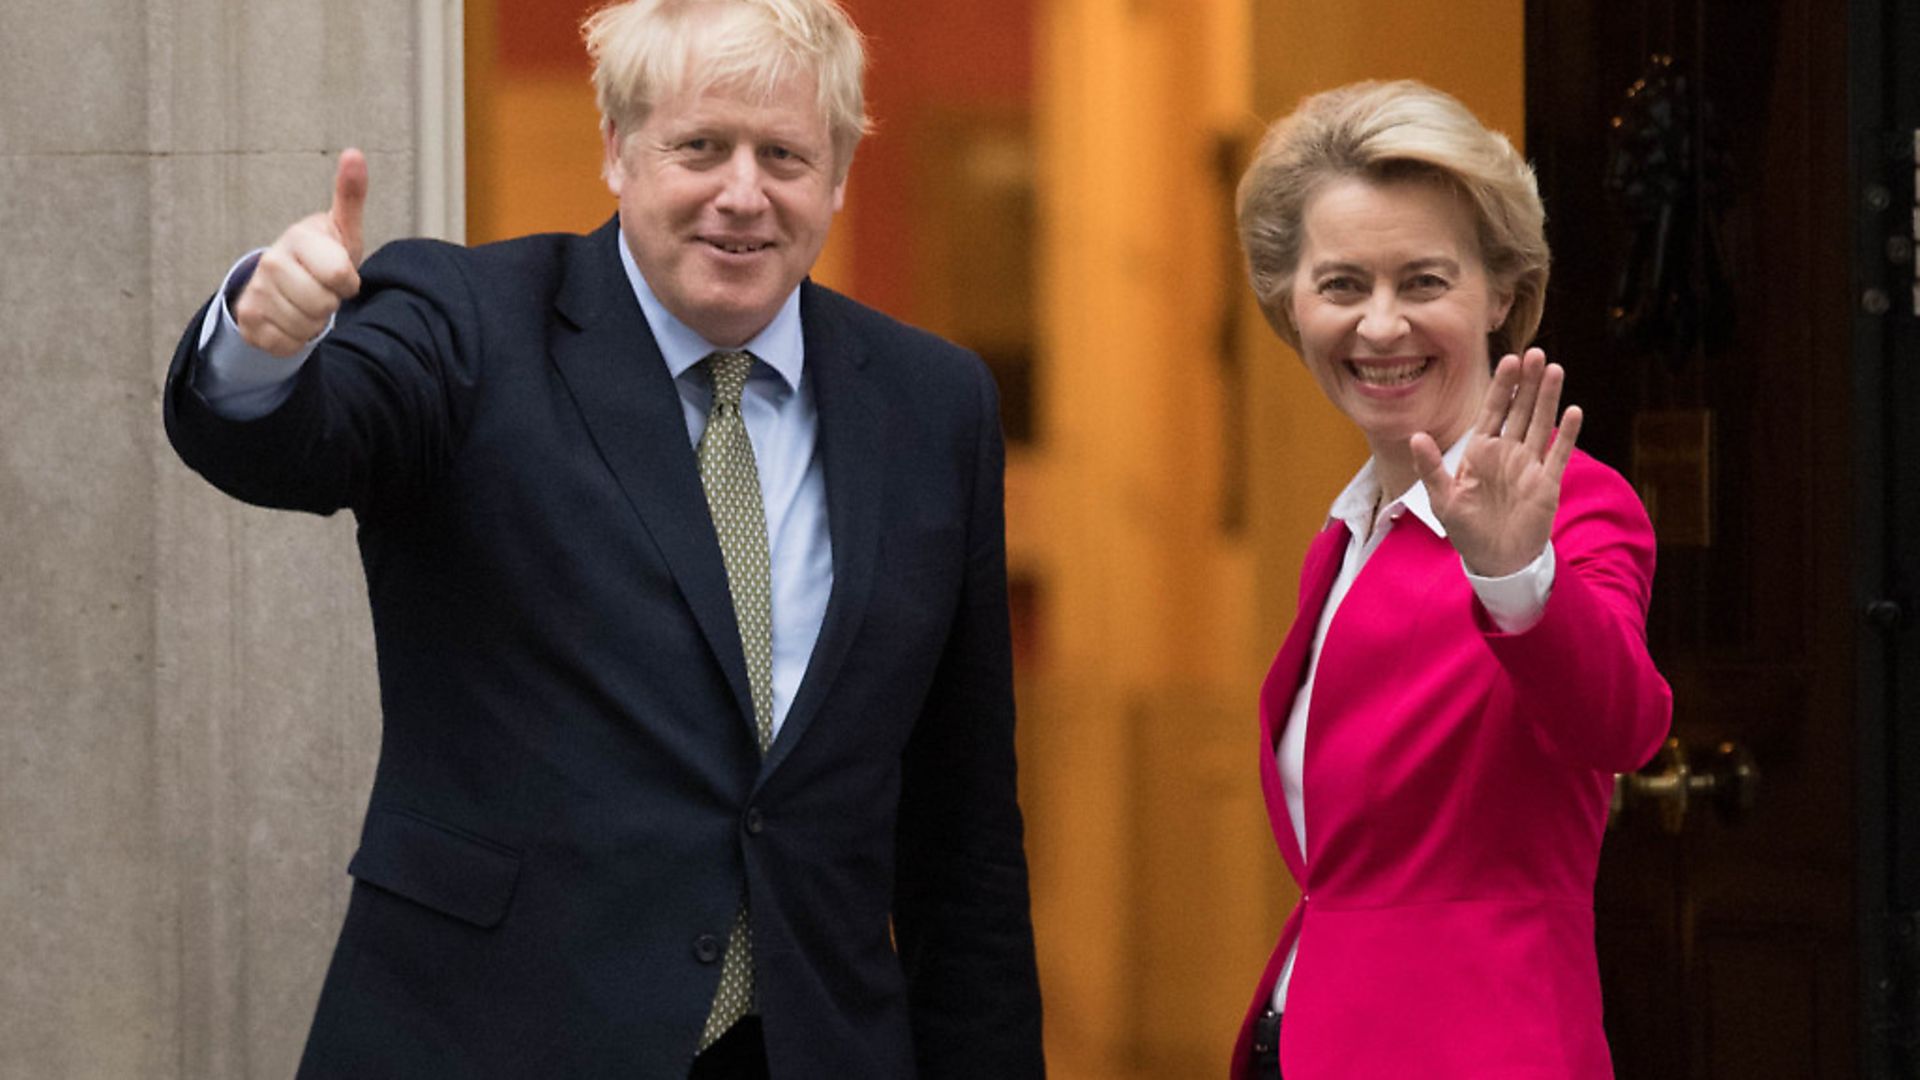 Prime Minister Boris Johnson greets EU Commission president Ursula von der Leyen ahead of a meeting in Downing Street. Photograph: Stefan Rousseau/PA. - Credit: PA